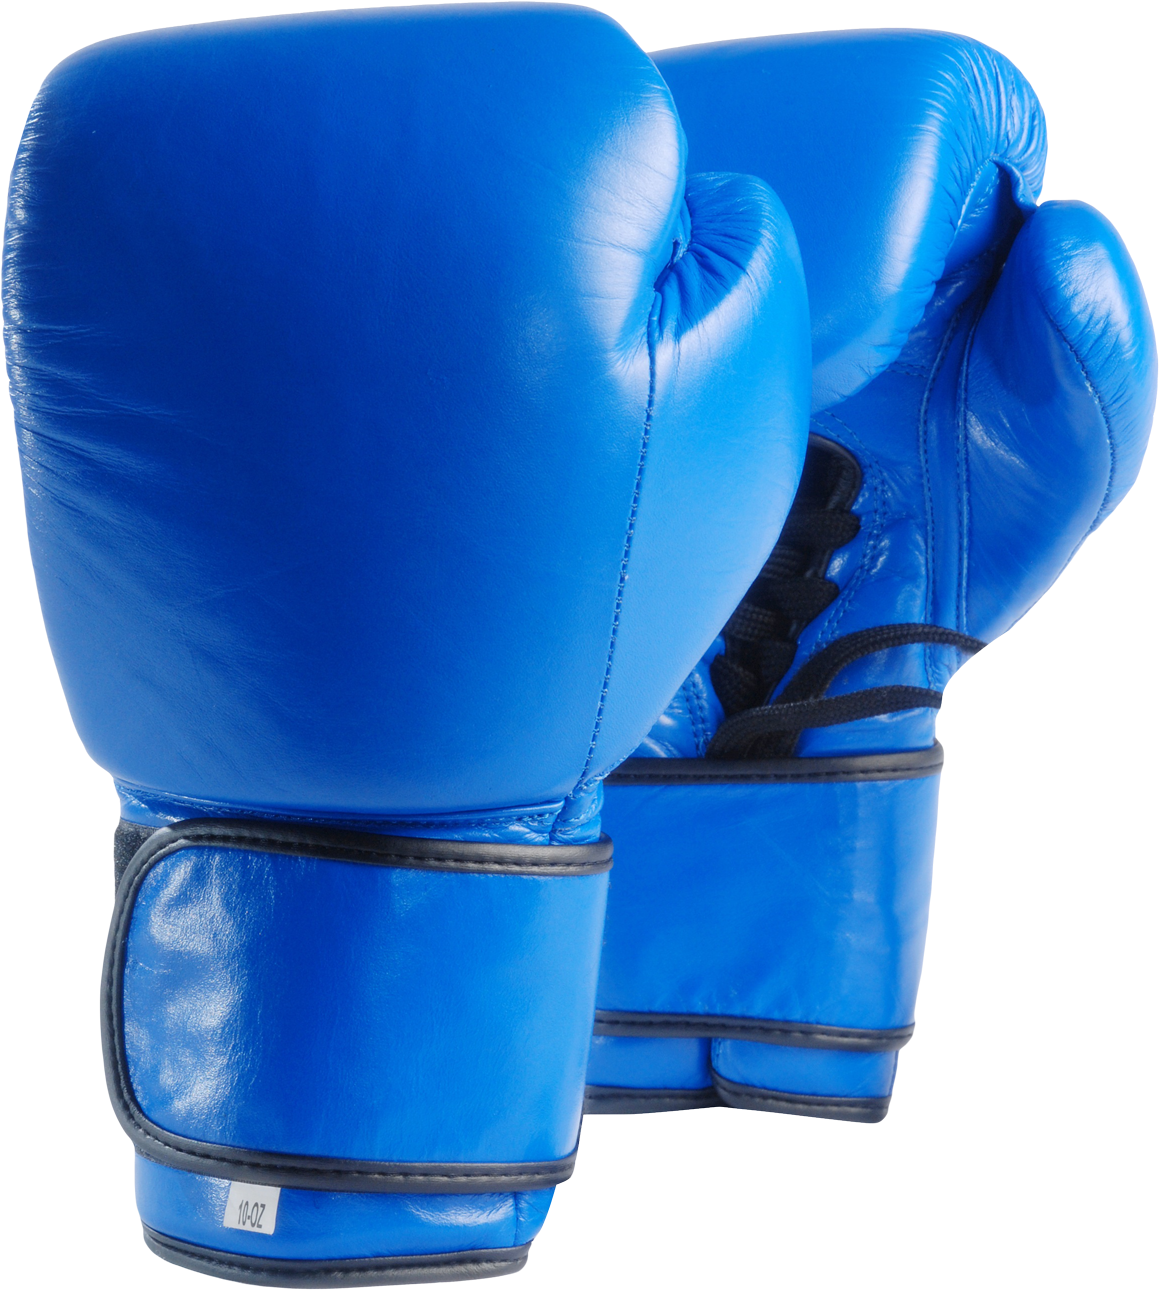 A Pair Of Blue Boxing Gloves